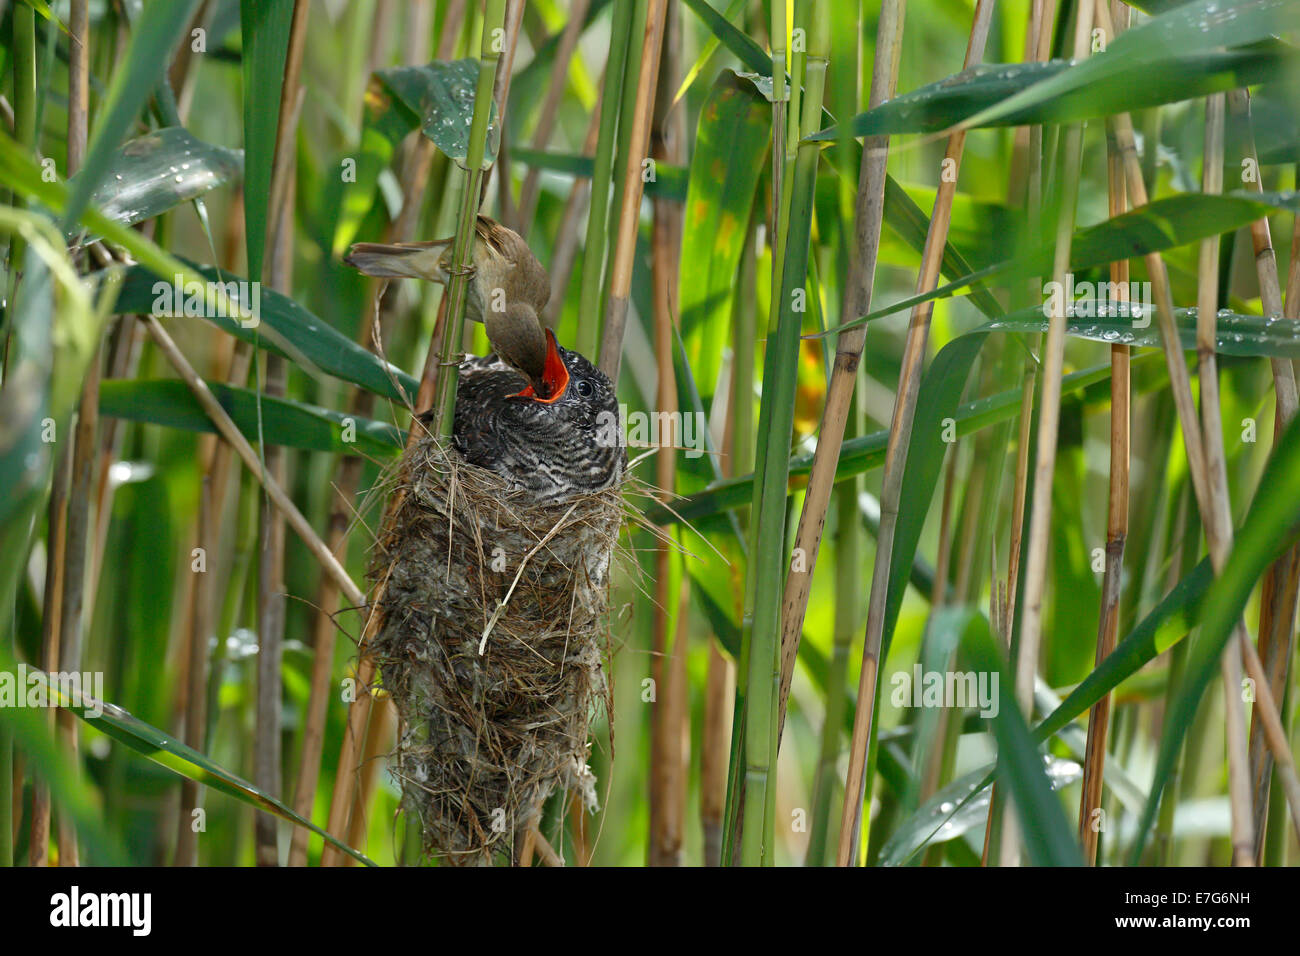 Cuckoo (Cuculus canorus), young bird being fed by the host bird, a Reed Warbler (Acrocephalus scirpaceus) on the nest Stock Photo